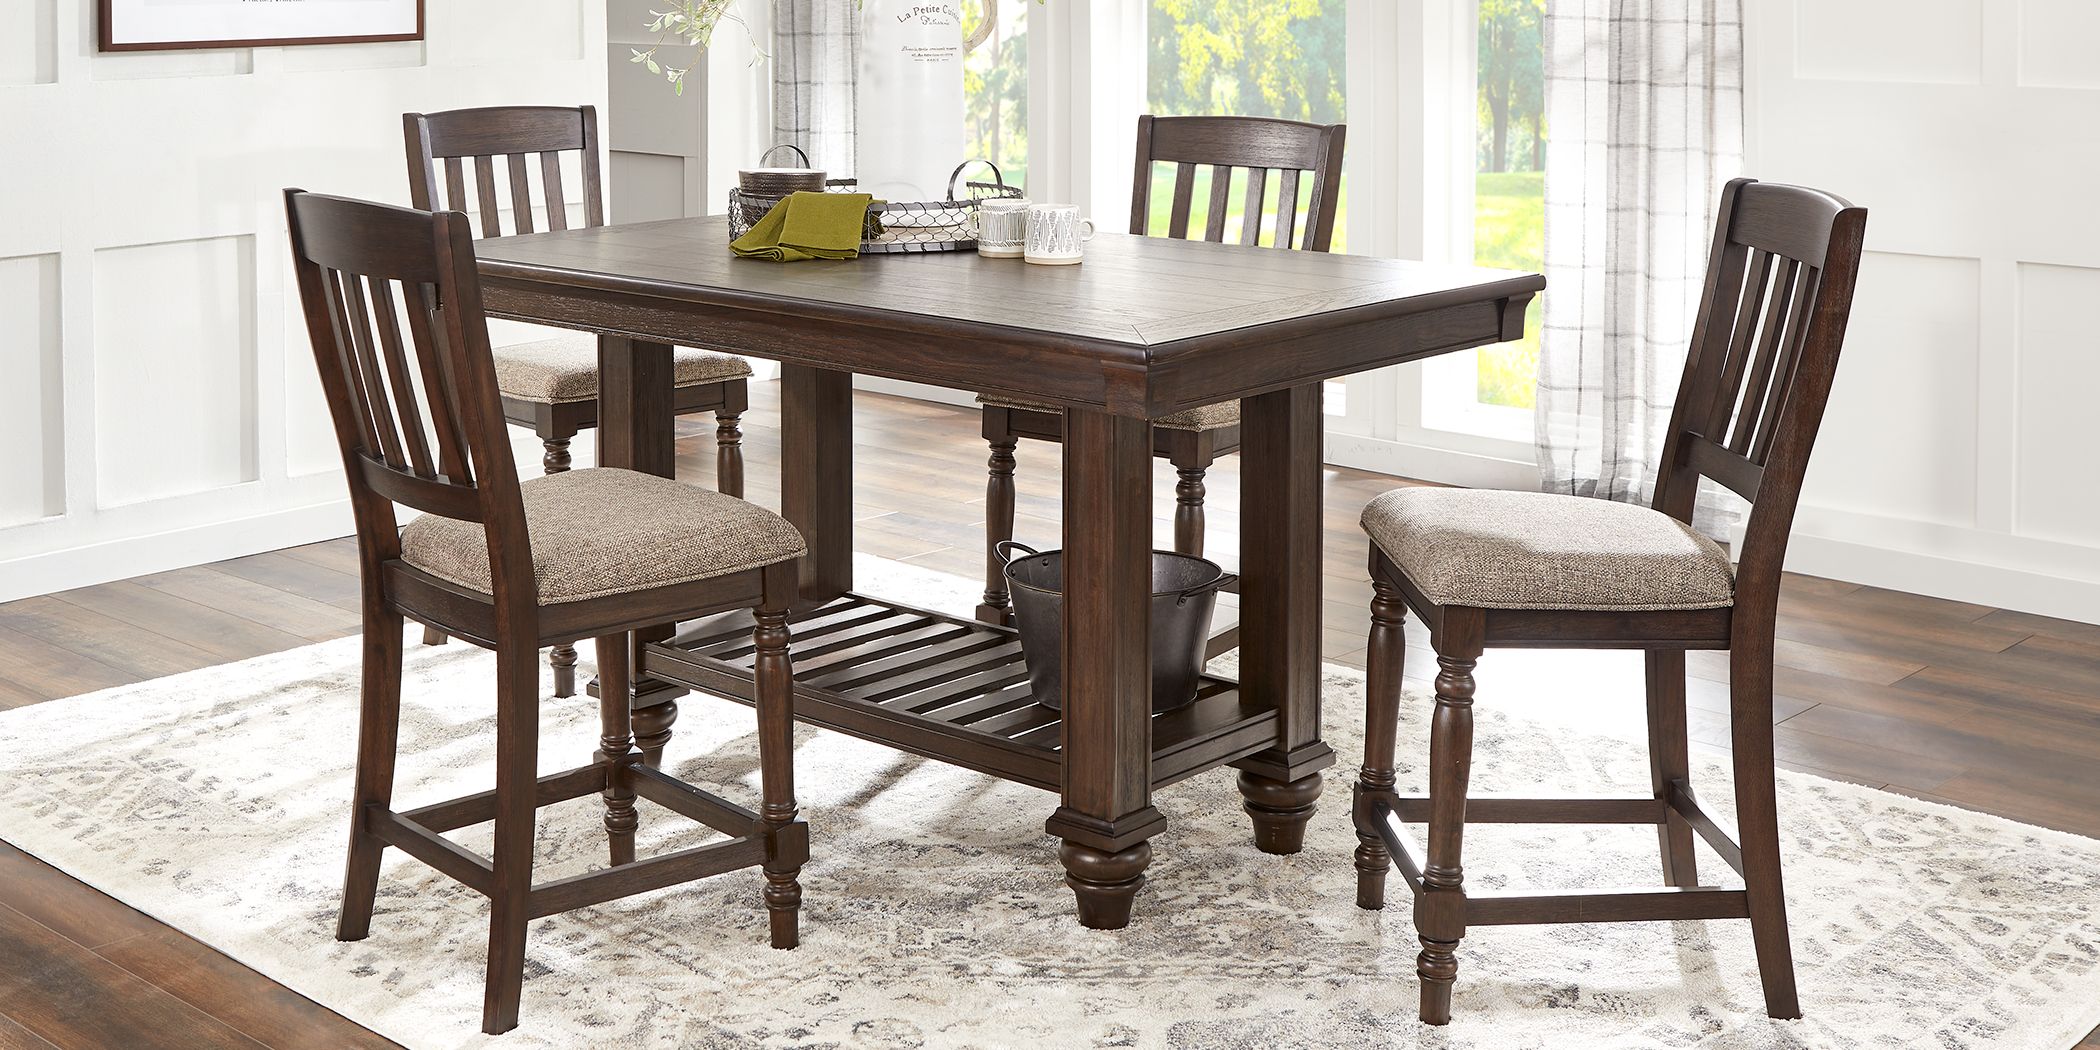 Oakdale Brown 5 Pc Dining Room - Rooms To Go